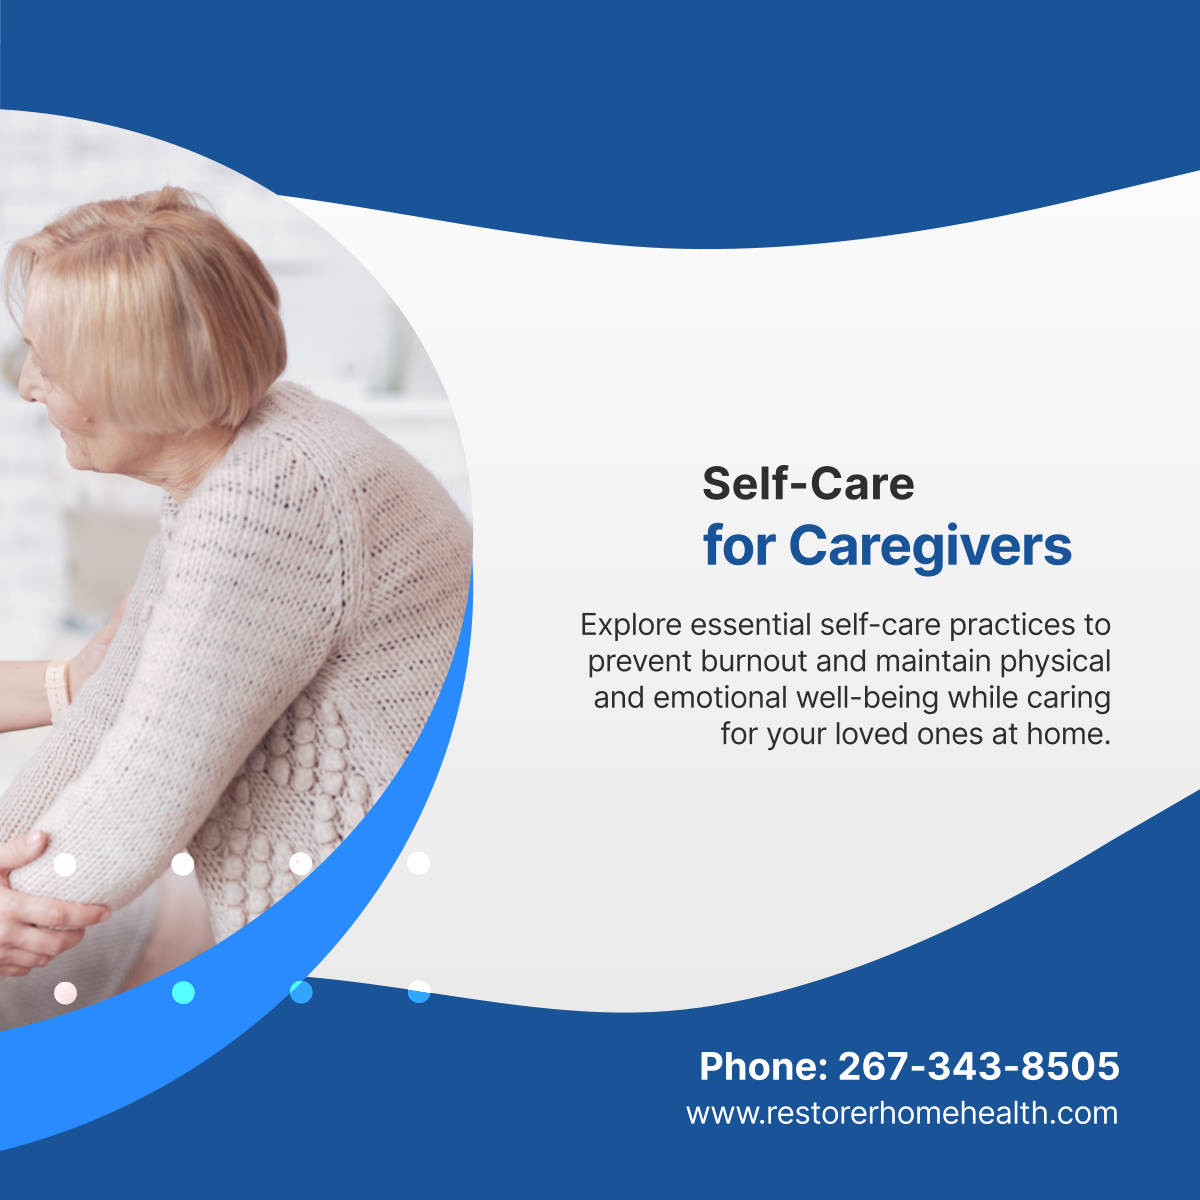 Elevate your home caregiving experience with these invaluable tips. Prioritize safety, communication, and self-care for a fulfilling caregiving journey. 

#HomeHealthcare #PhiladelphiaPA #CaregivingTips